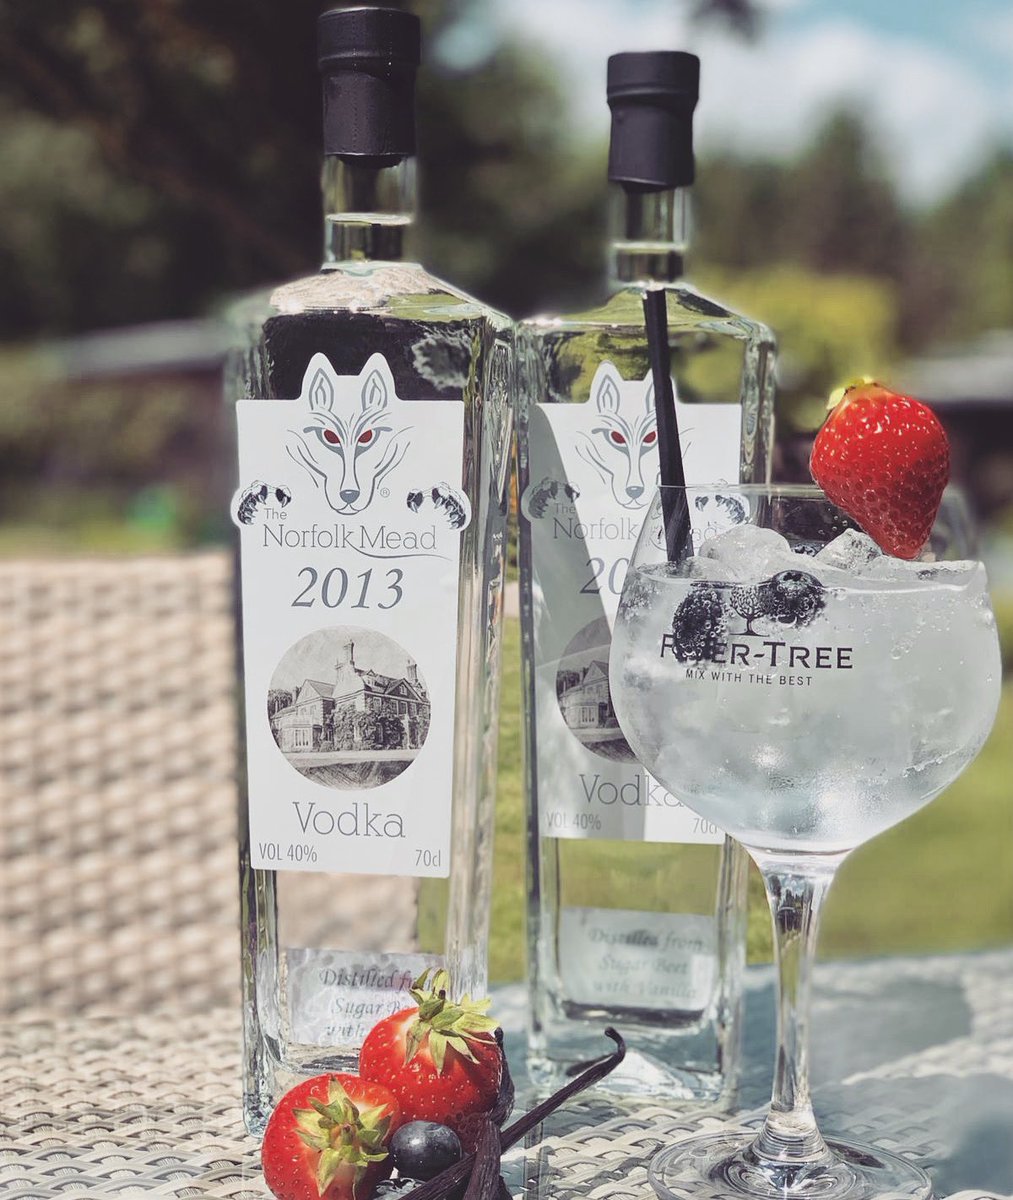 Check out our NEW Sugar Beet & Vanilla Vodka named ‘2013’. 🍸 After the successful launch of our gin, we have worked with @blackshuckgin to bring these to the table 🤩 Purchase your bottle for £40! Just speak to our staff or reception team where they will be able to assist 🍓